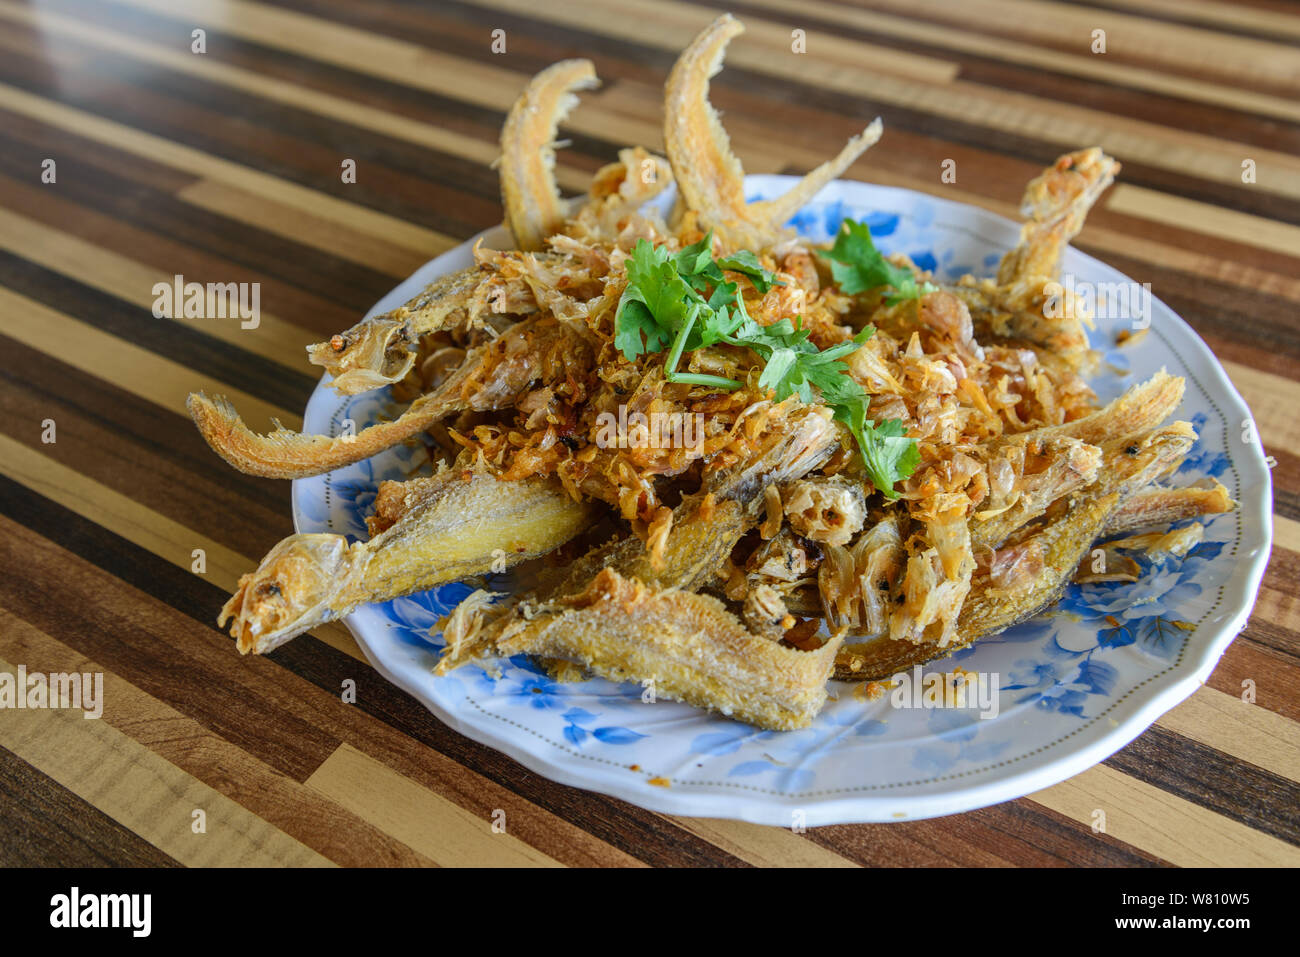 Fried crispy garlic soft fish or sheat fish, famous Thai meal menu for lunch or dinner. Stock Photo